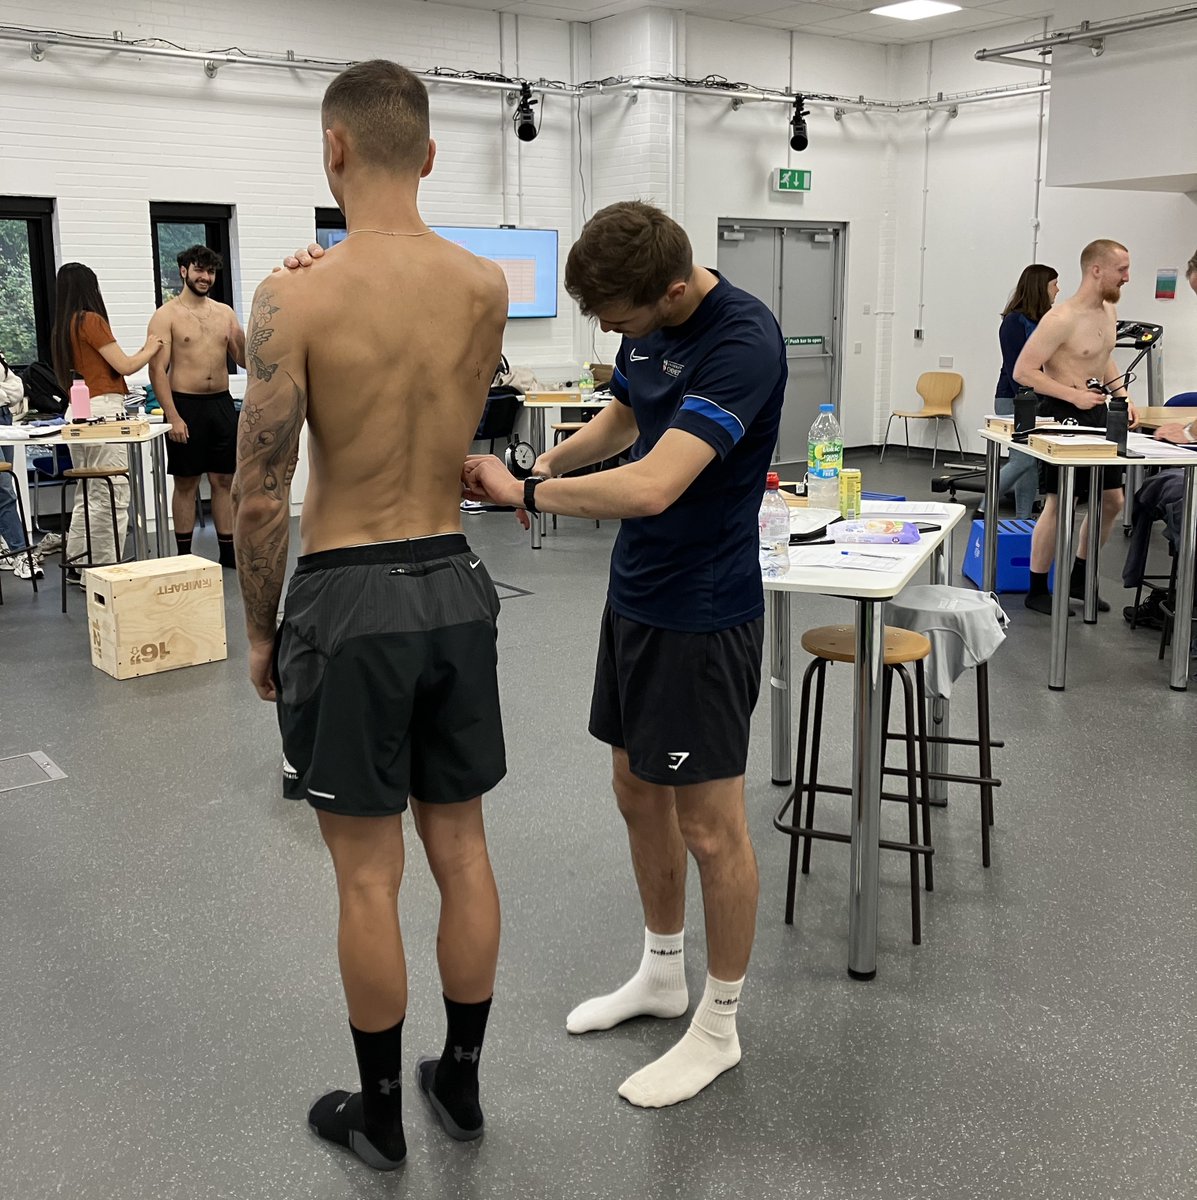 There’s one week to go until the Level 1 ISAK Anthropometry course from 25 - 27 March 2024 starts on Talbot Campus. Book your place here: bournemouth.ac.uk/study/courses/… @NutritionBU @ExerciseSport @BUSportsTherapy @SportBU @BuPhysio @sportcoachingbu @bournemouthuni #ISAKcourse